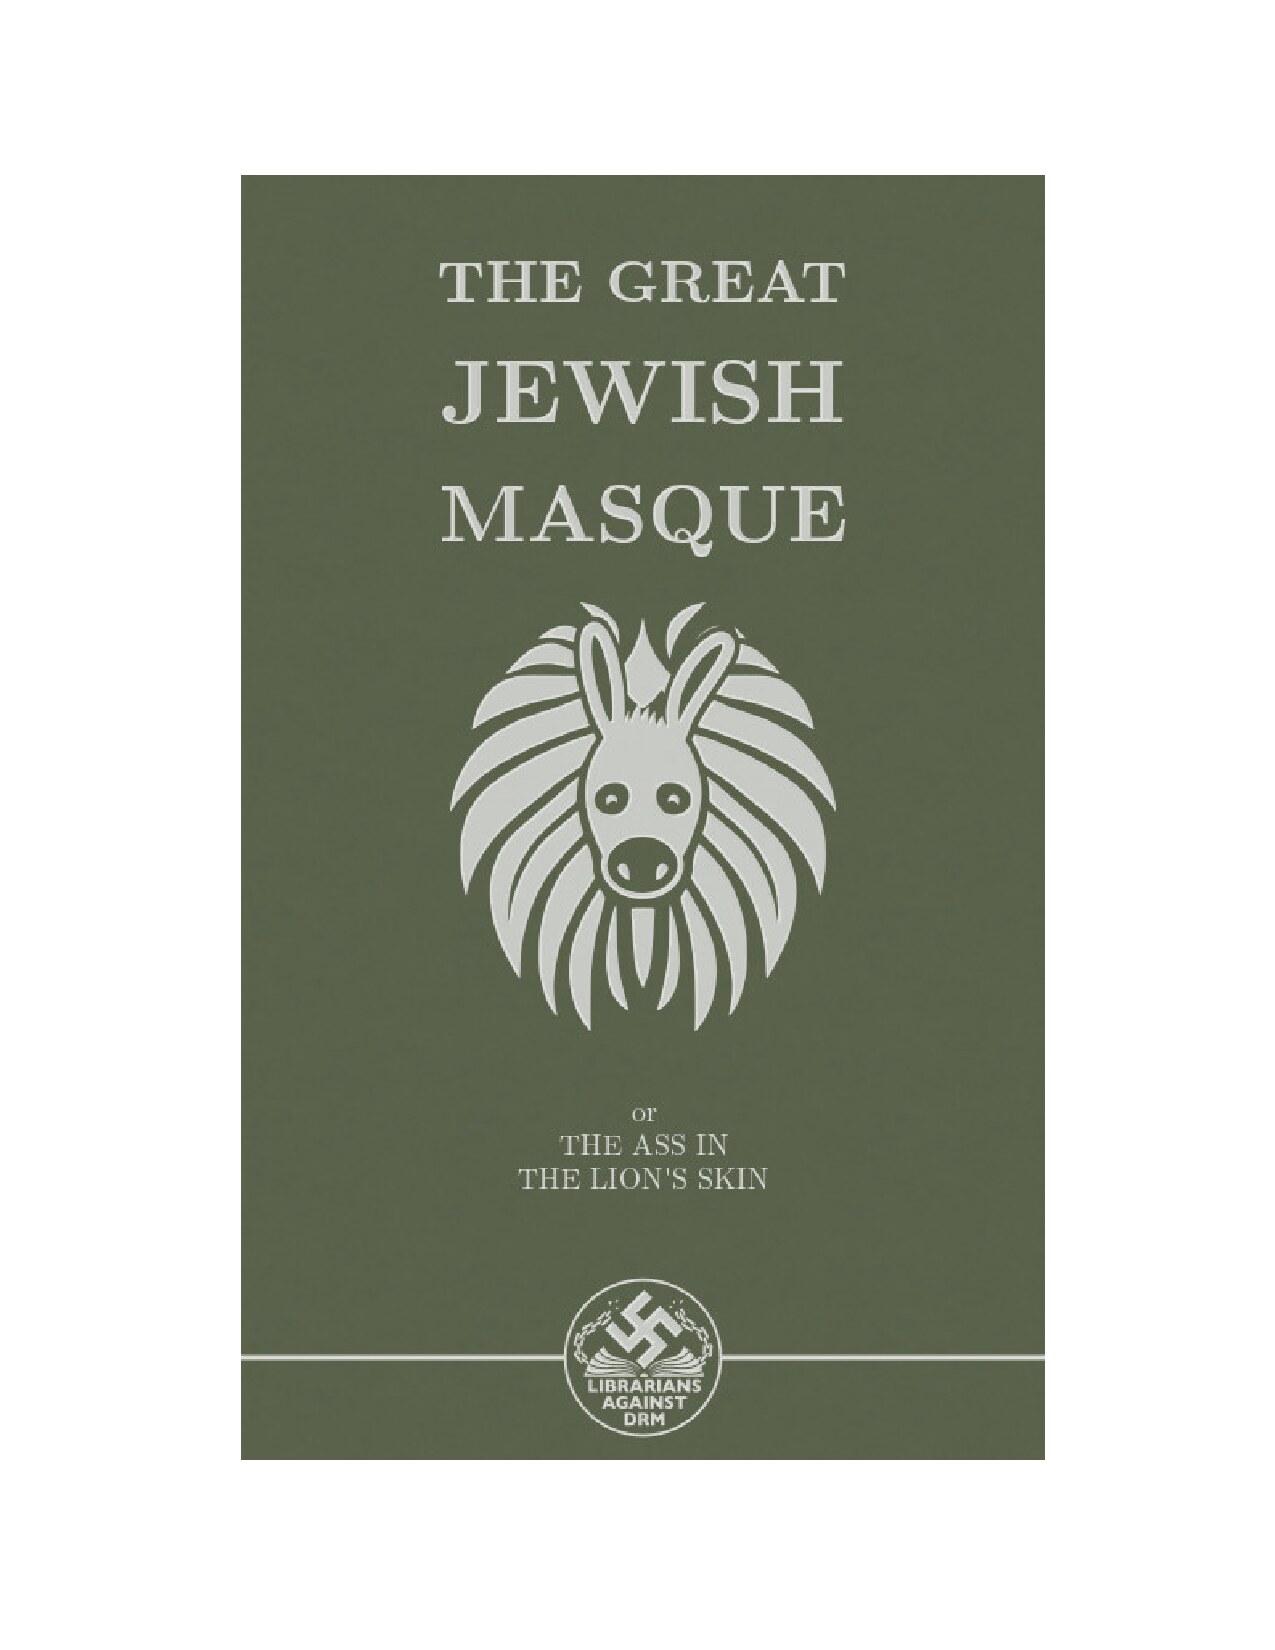 The Great Jewish Masque : or The Ass In The Lion's Skin